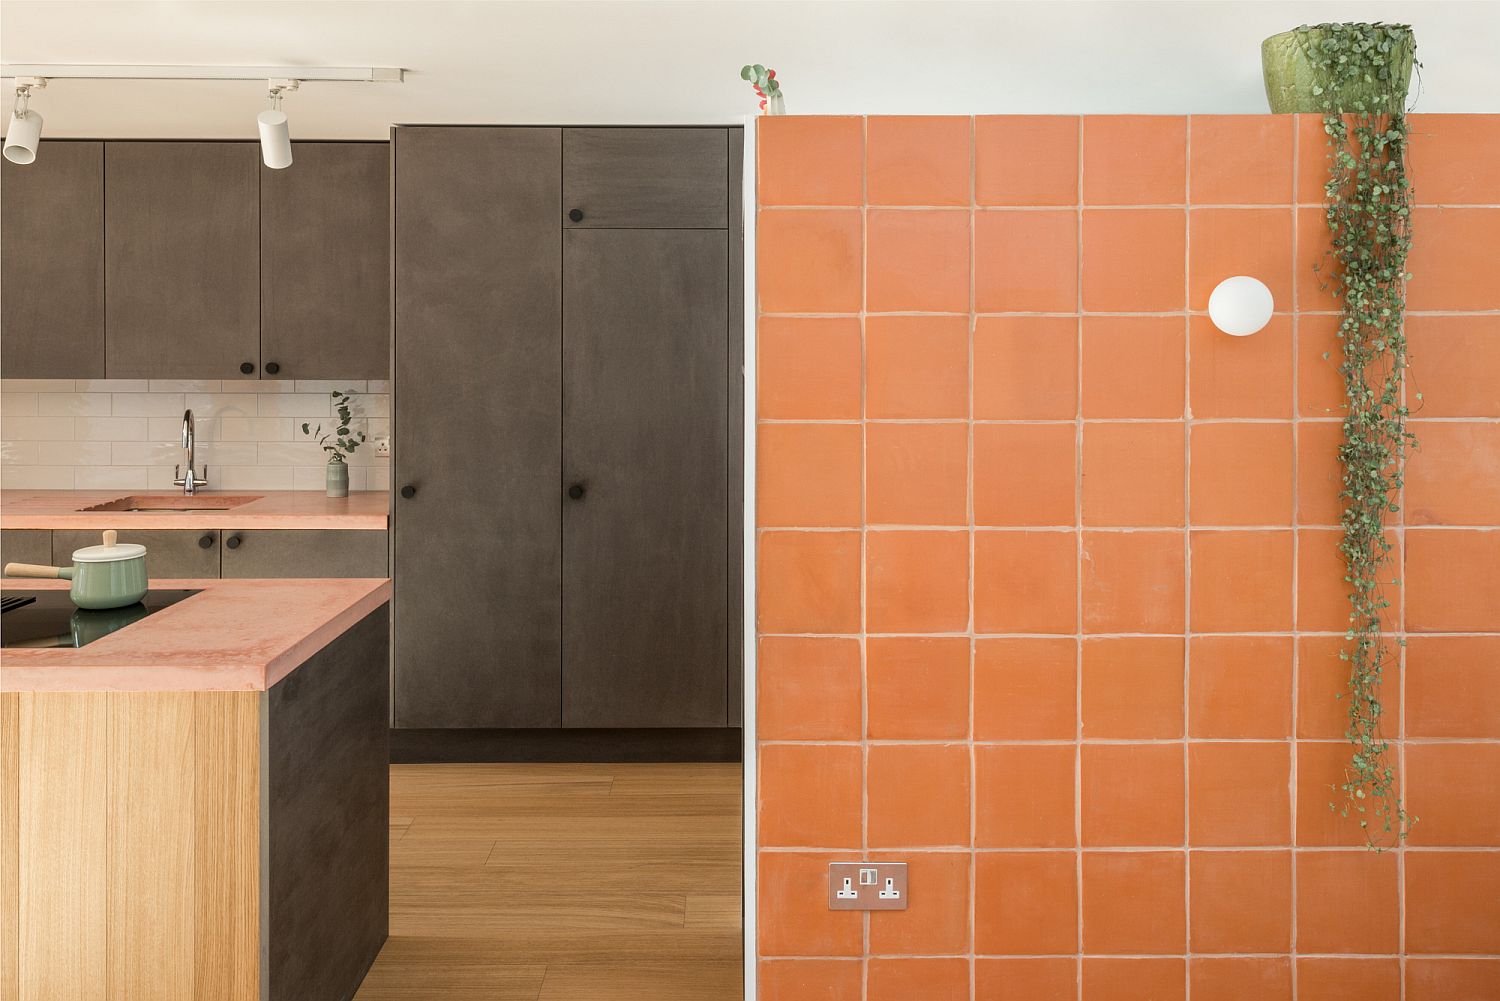 Pink-orange-and-natural-light-bring-ample-brightness-to-the-interior